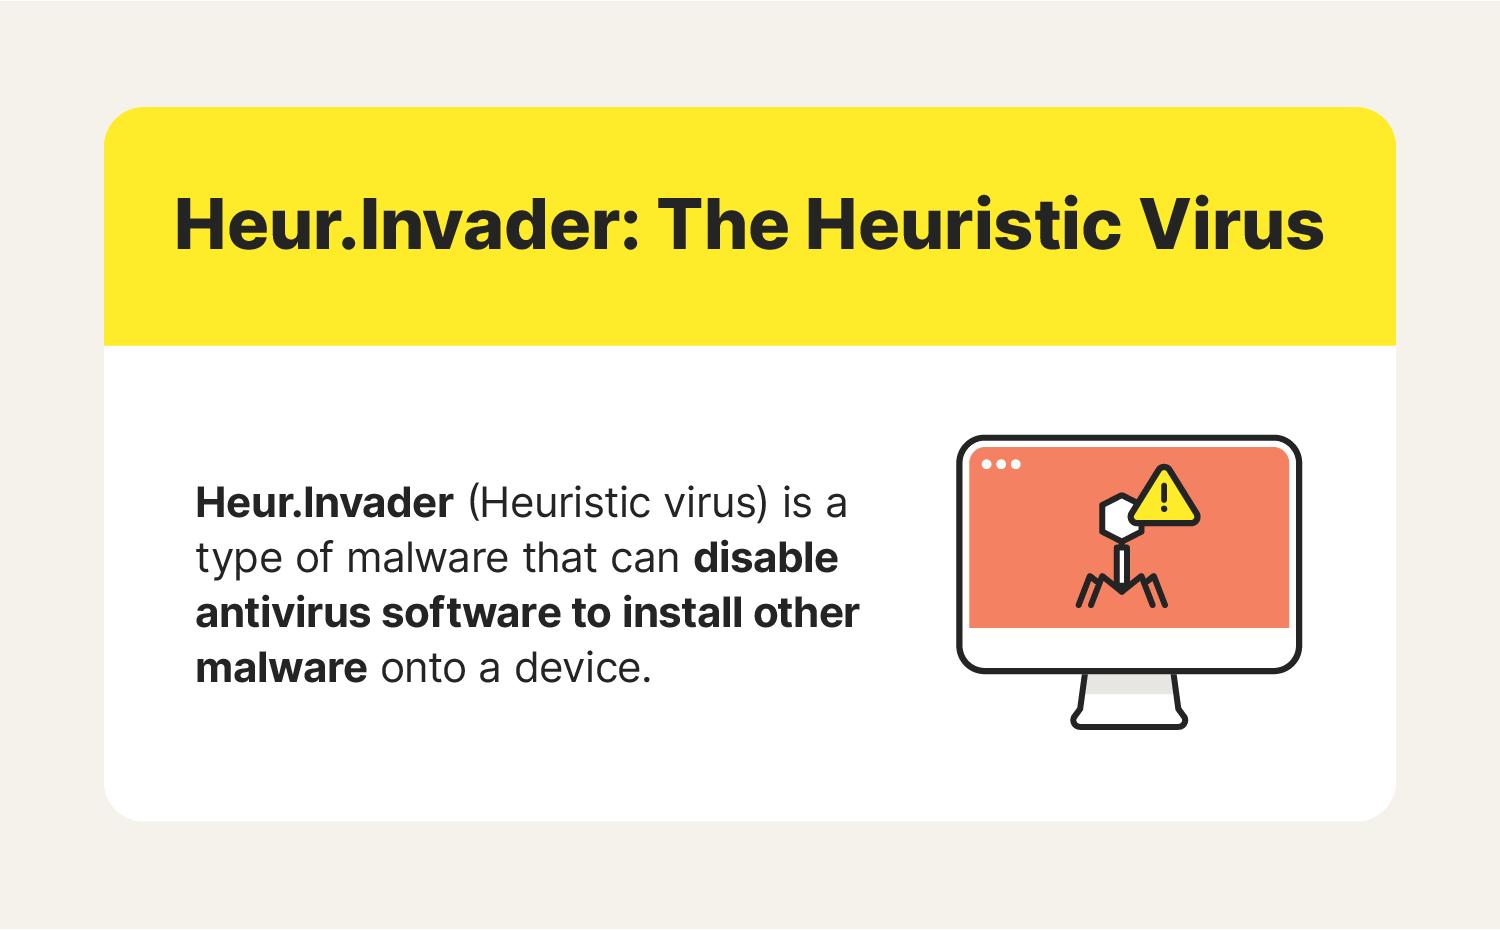 “Heuristic virus” is the nickname given to Heur.Invader, a type of malware that can disable antivirus software to install other malware onto a device.